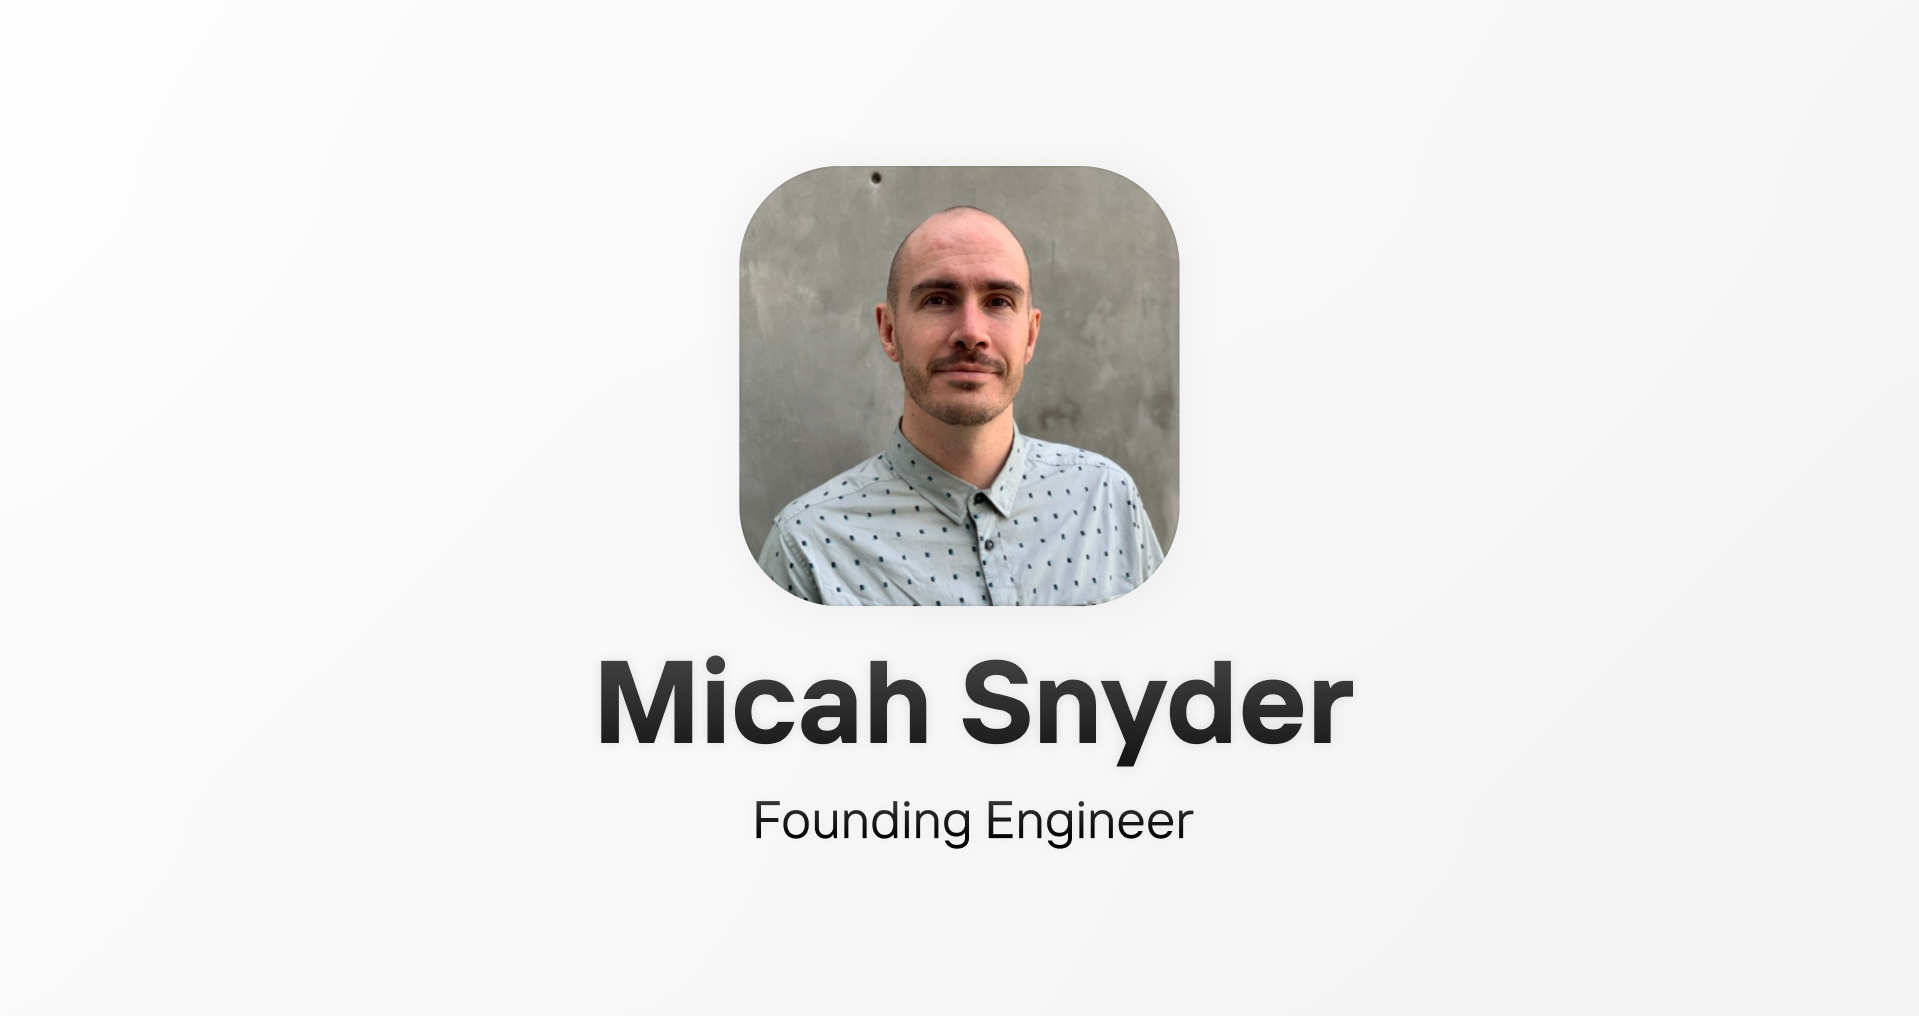 Micah Snyder joins as Founding Engineer